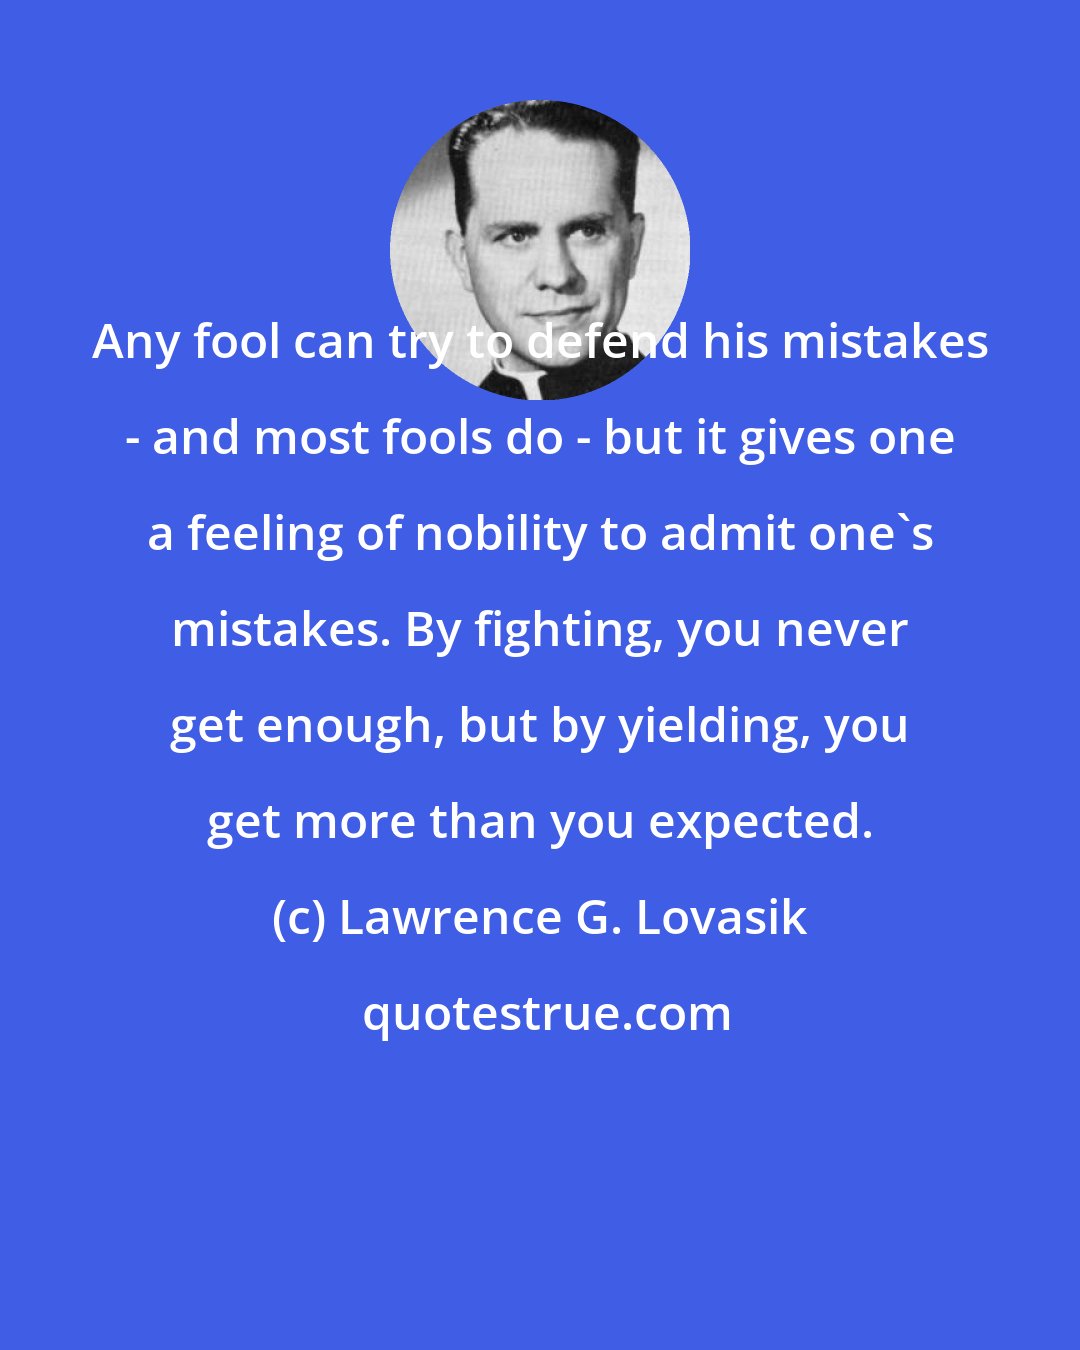 Lawrence G. Lovasik: Any fool can try to defend his mistakes - and most fools do - but it gives one a feeling of nobility to admit one's mistakes. By fighting, you never get enough, but by yielding, you get more than you expected.